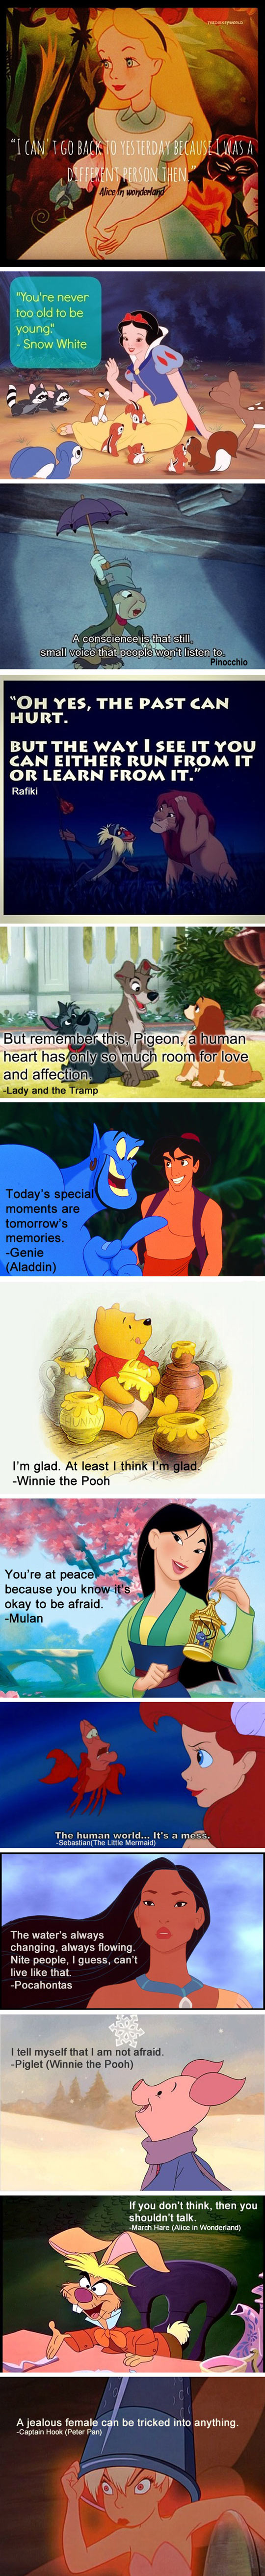 Wise words from Disney.